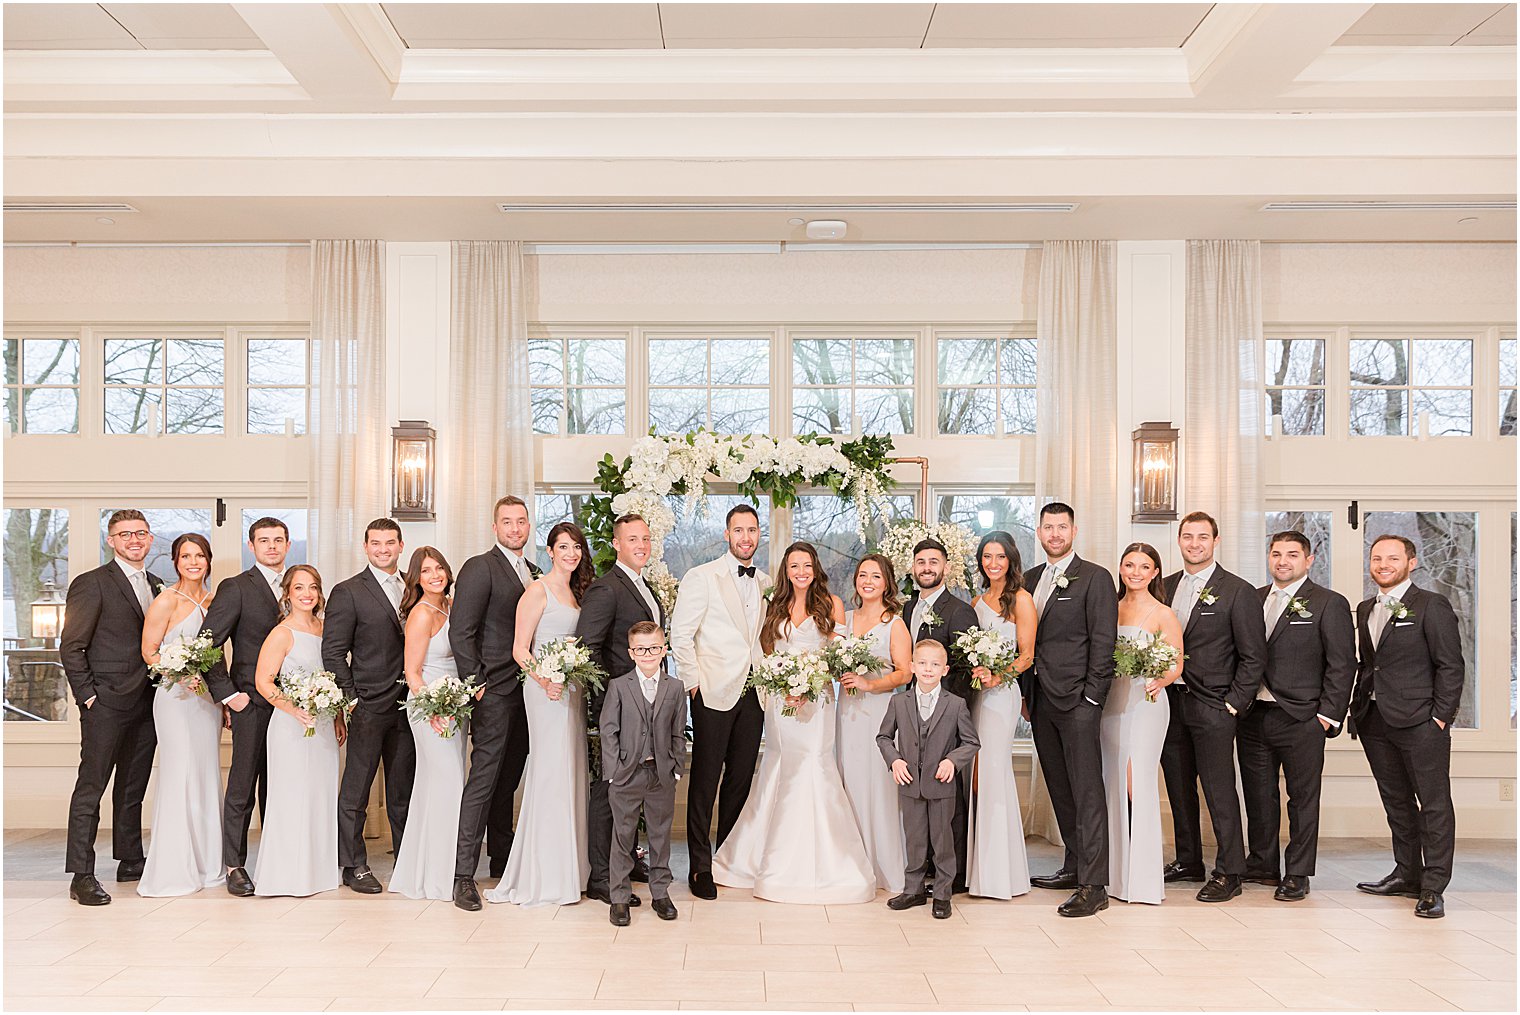 newlyweds pose with wedding party in grey and light blue gowns